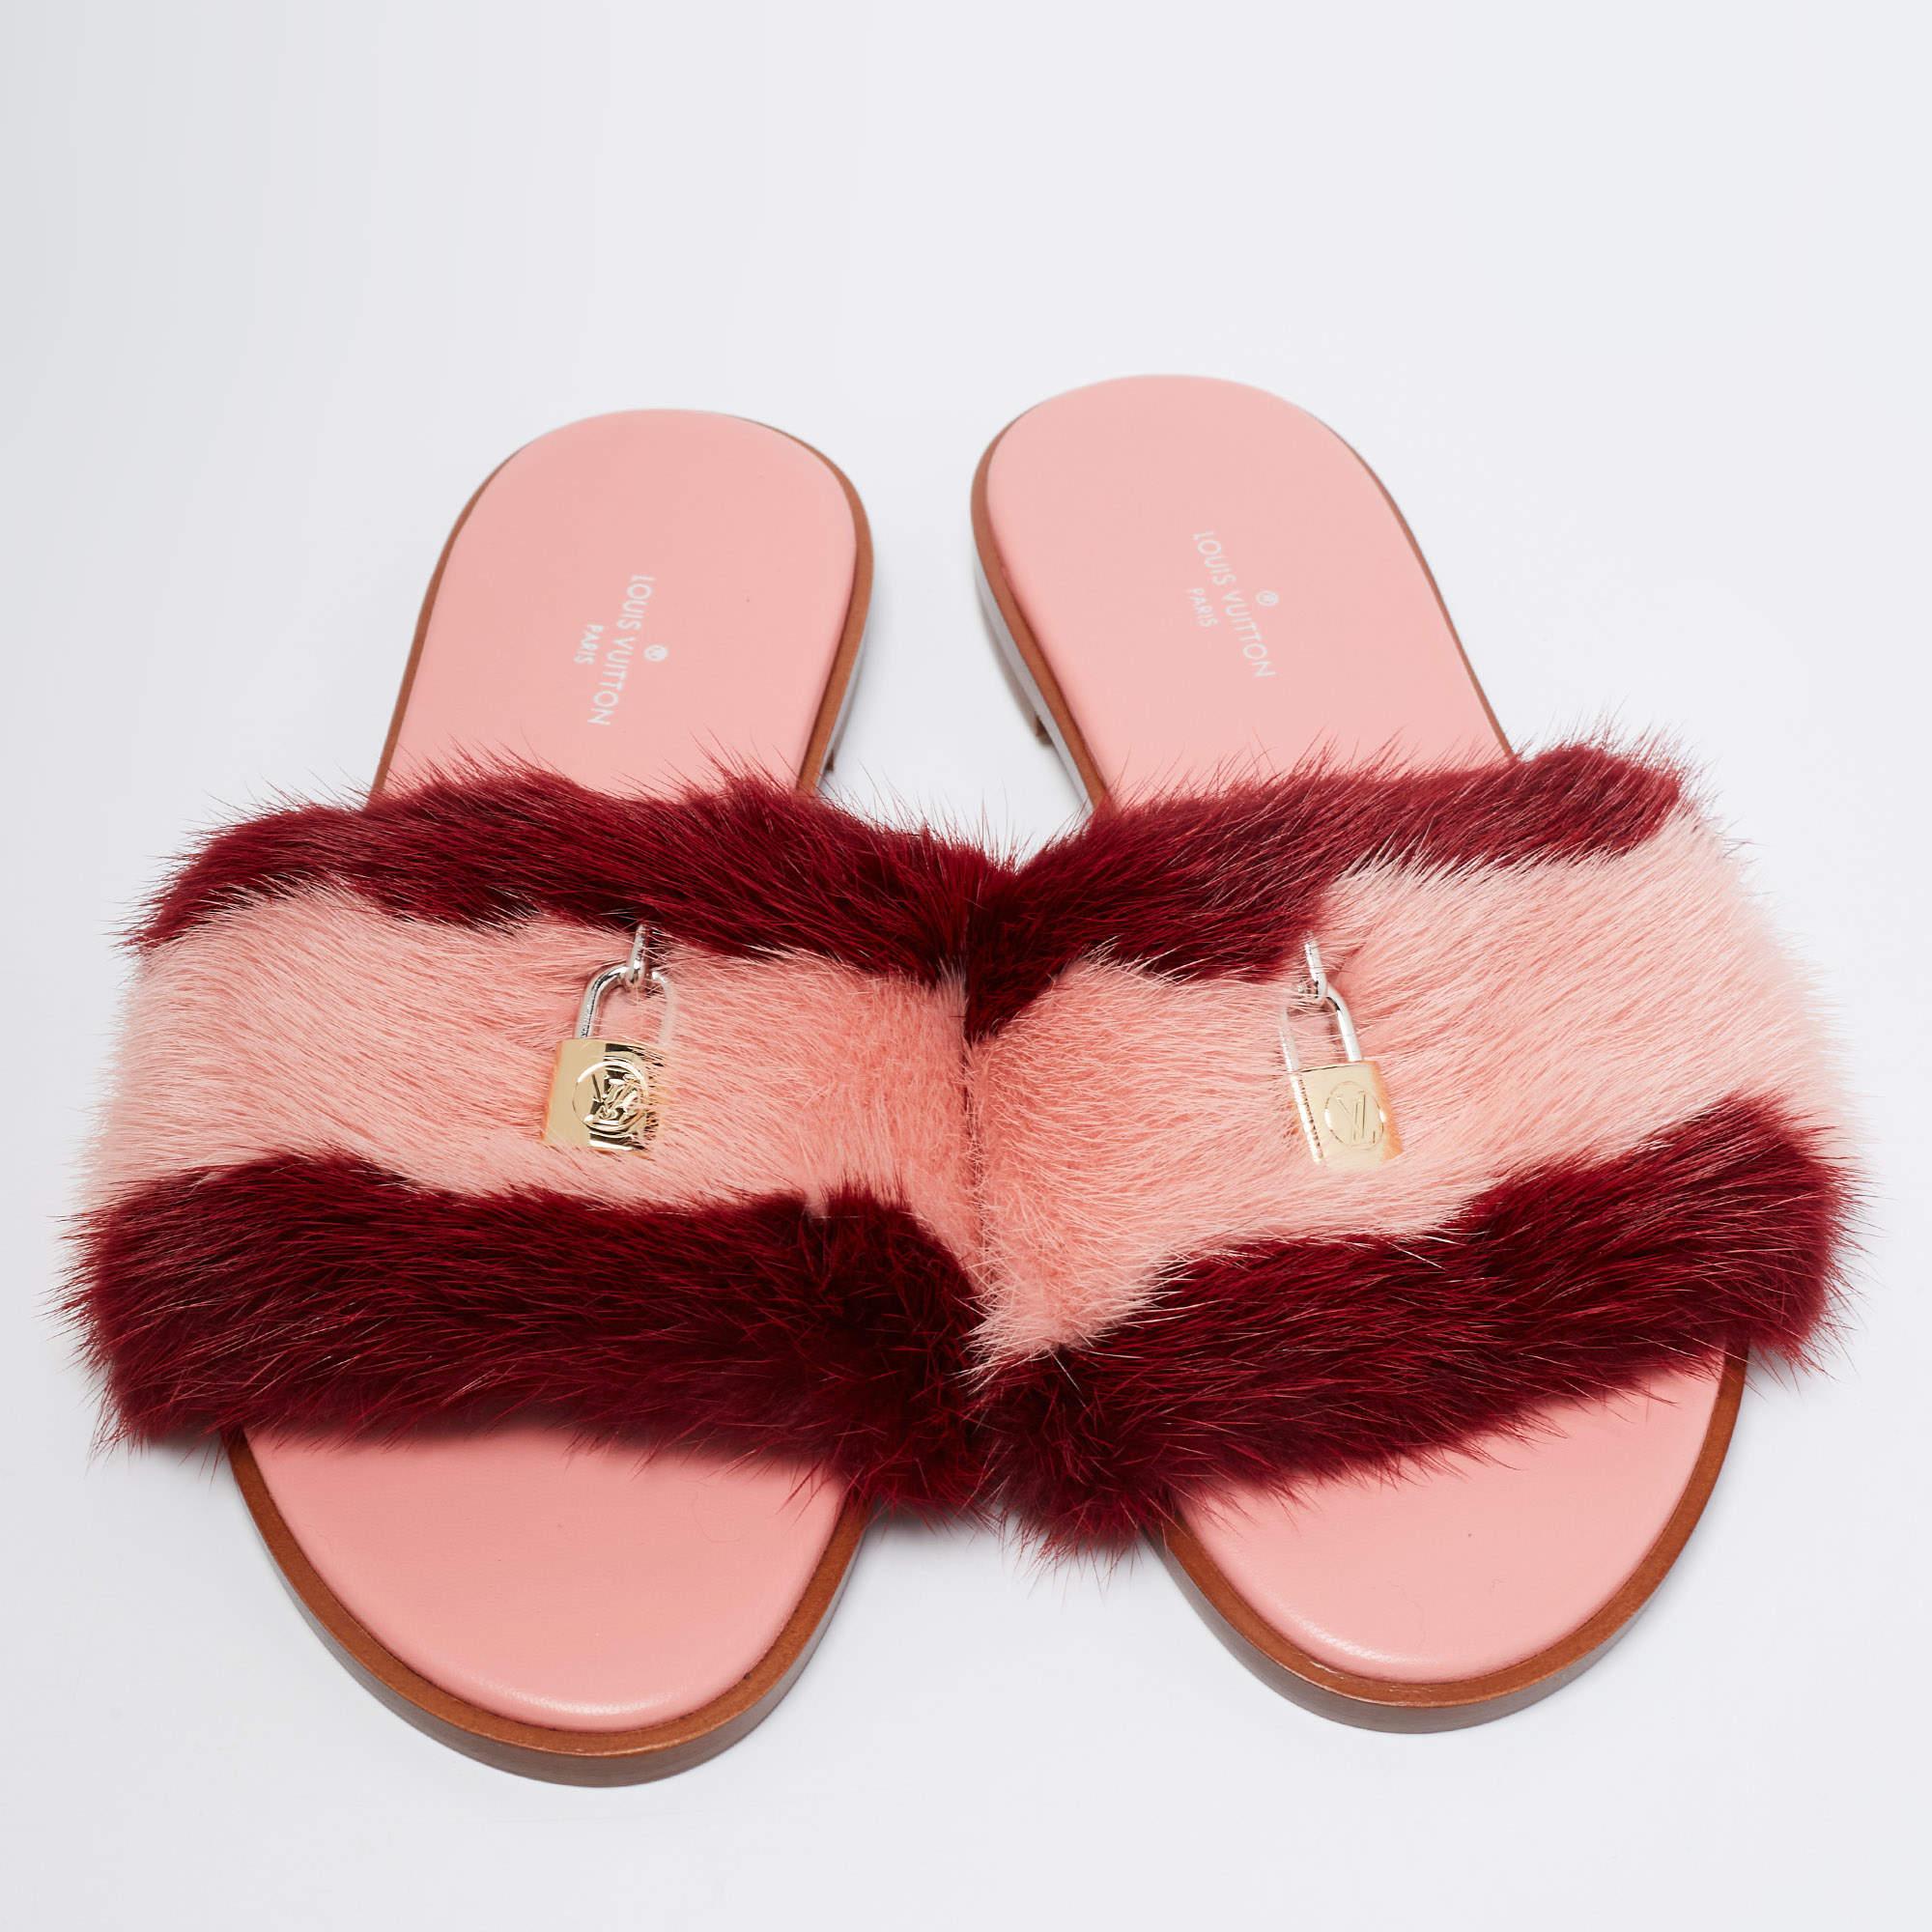 These slides by Louis Vuitton showcase a lovely design. Crafted from mink fur, the pink-red flats feature open toes and broad straps with LV locks. They come with leather-lined insoles that have the brand label. Wear them with breezy dresses for an